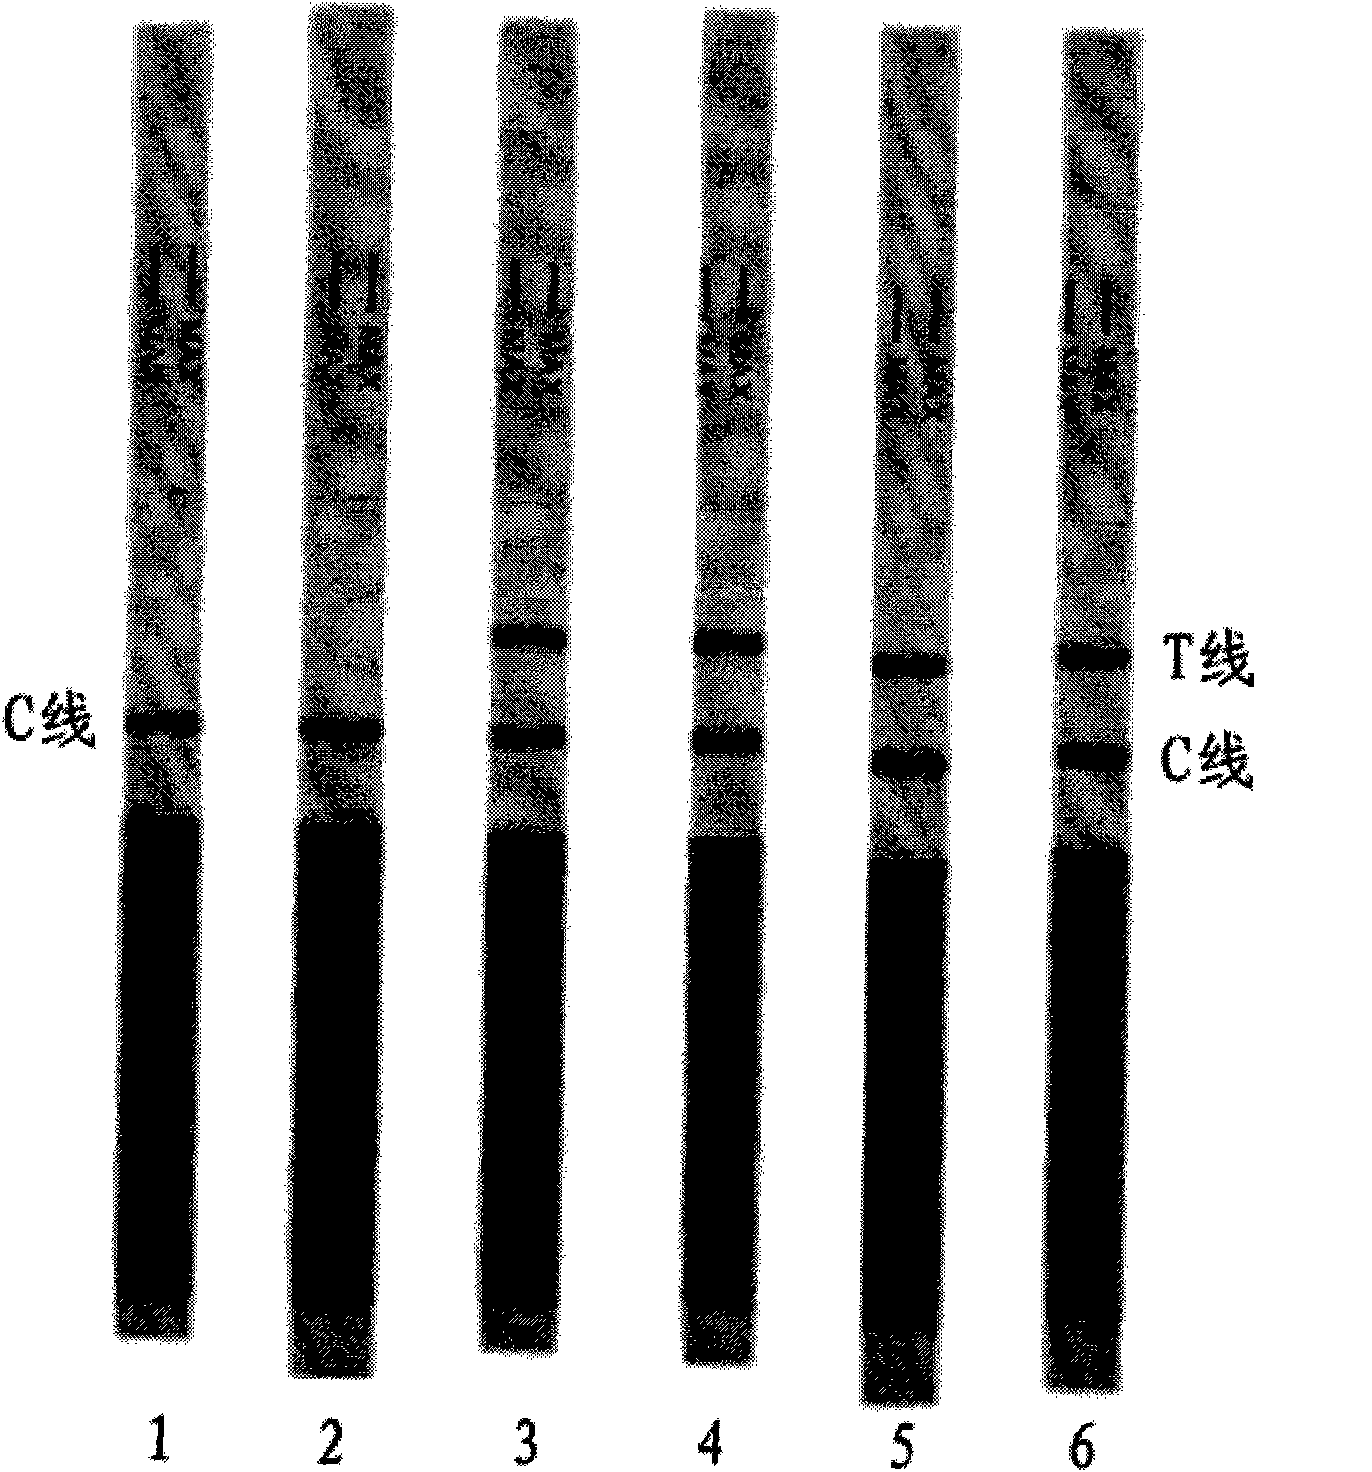 Immune colloidal gold test paper for detecting mycobacterium bovis antibody and preparation method thereof